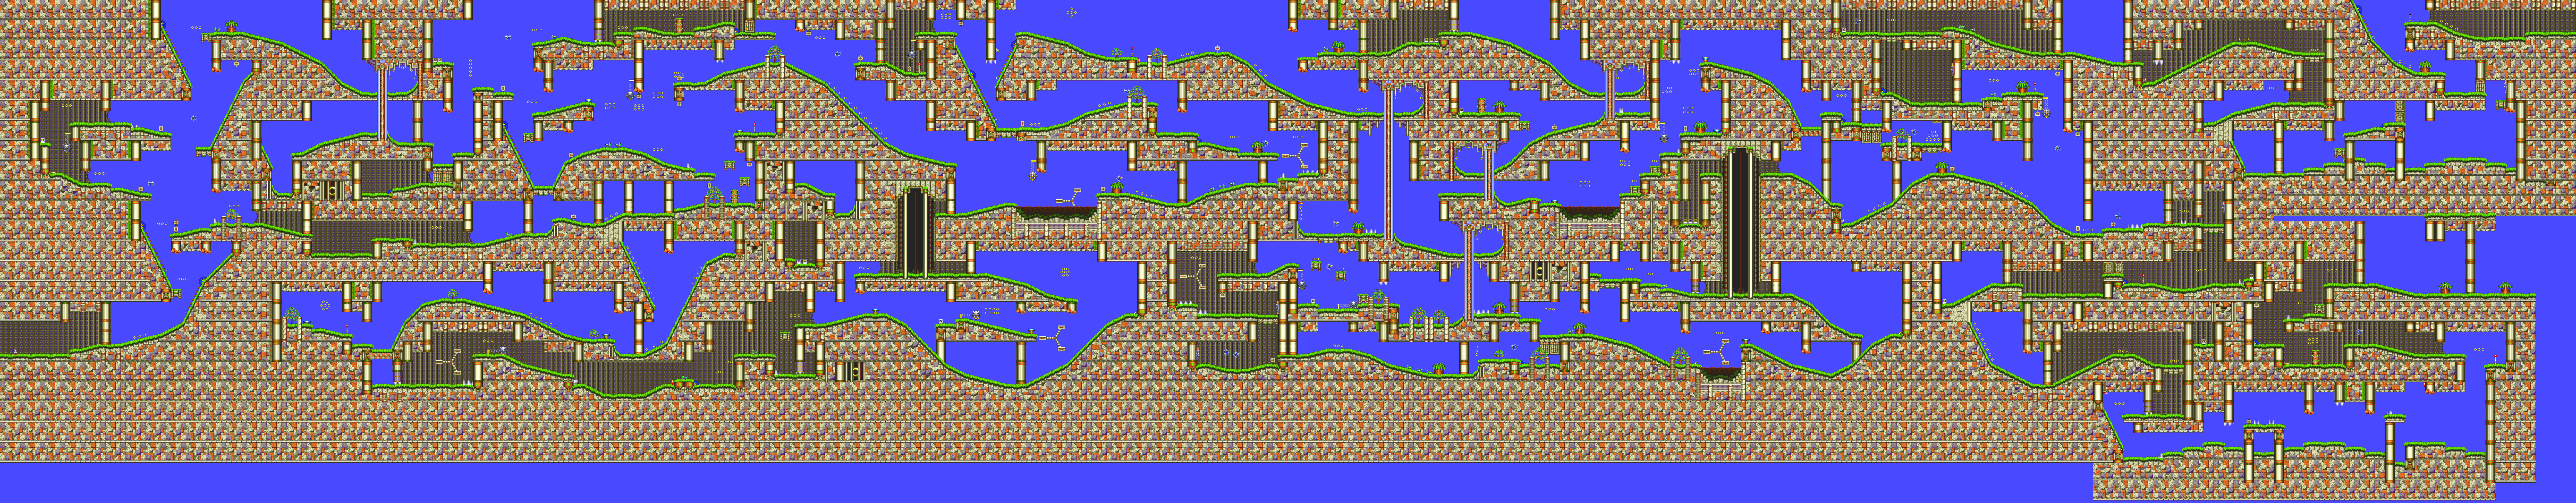 Sonic3%26K_MD_Map_MGZ2.png